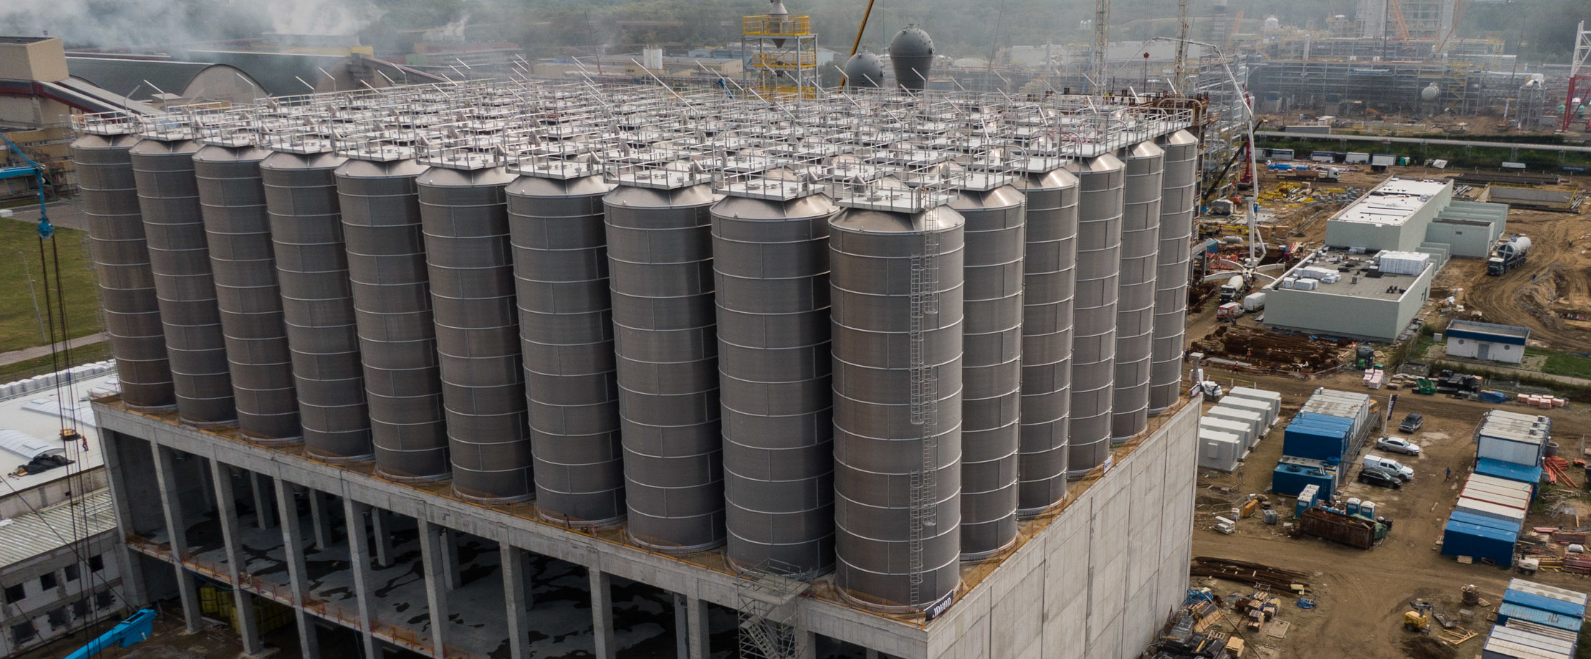 The assembly of 60 storage silos has been completed